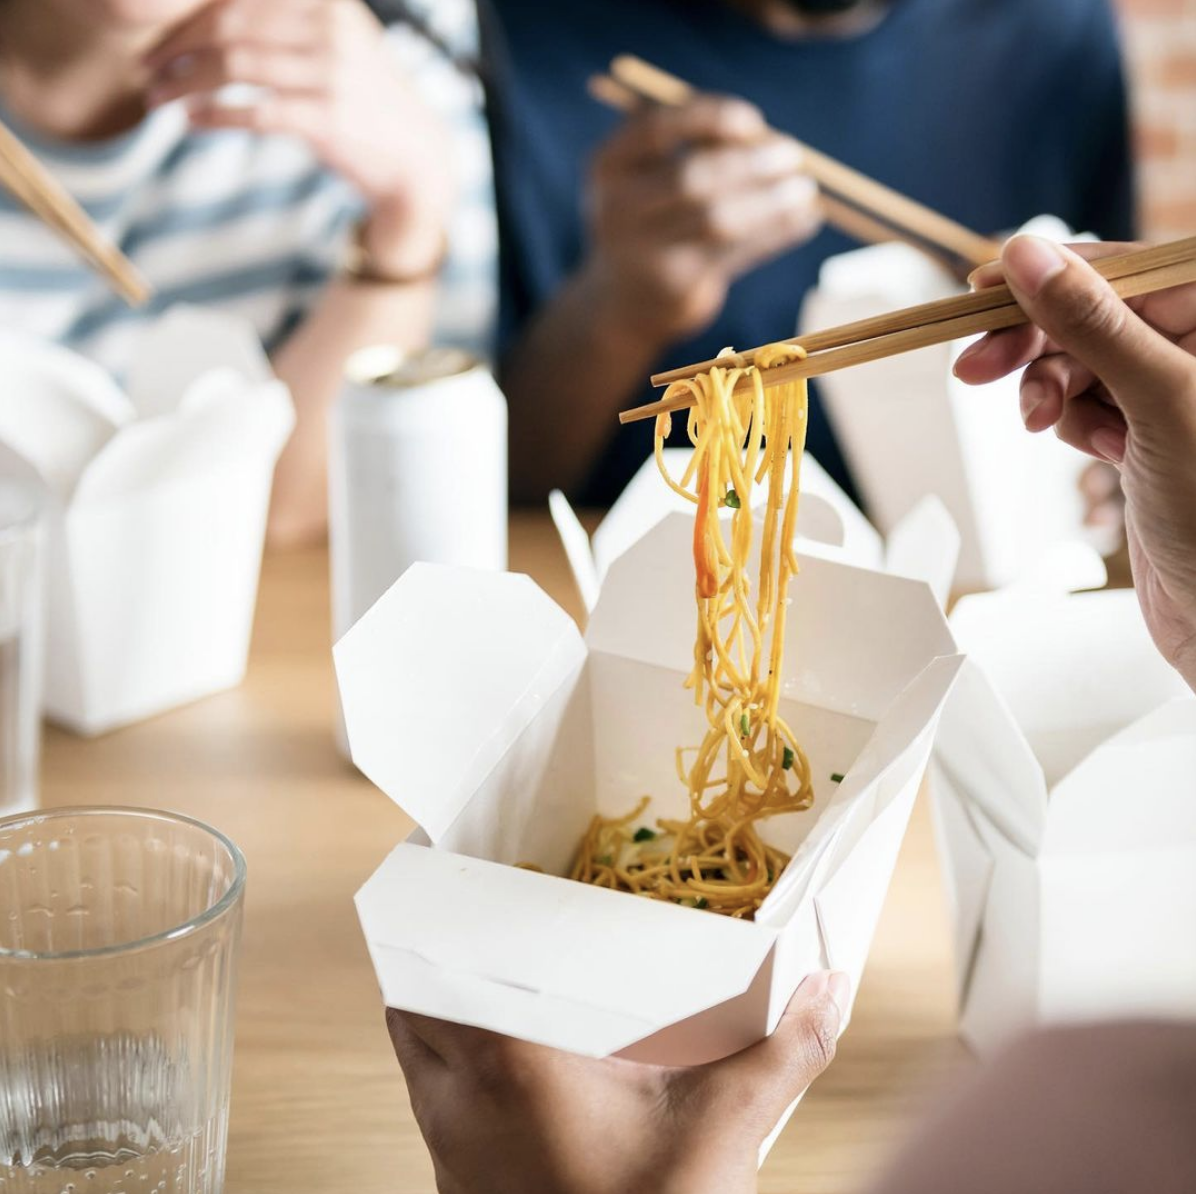 people eating with chopsticks